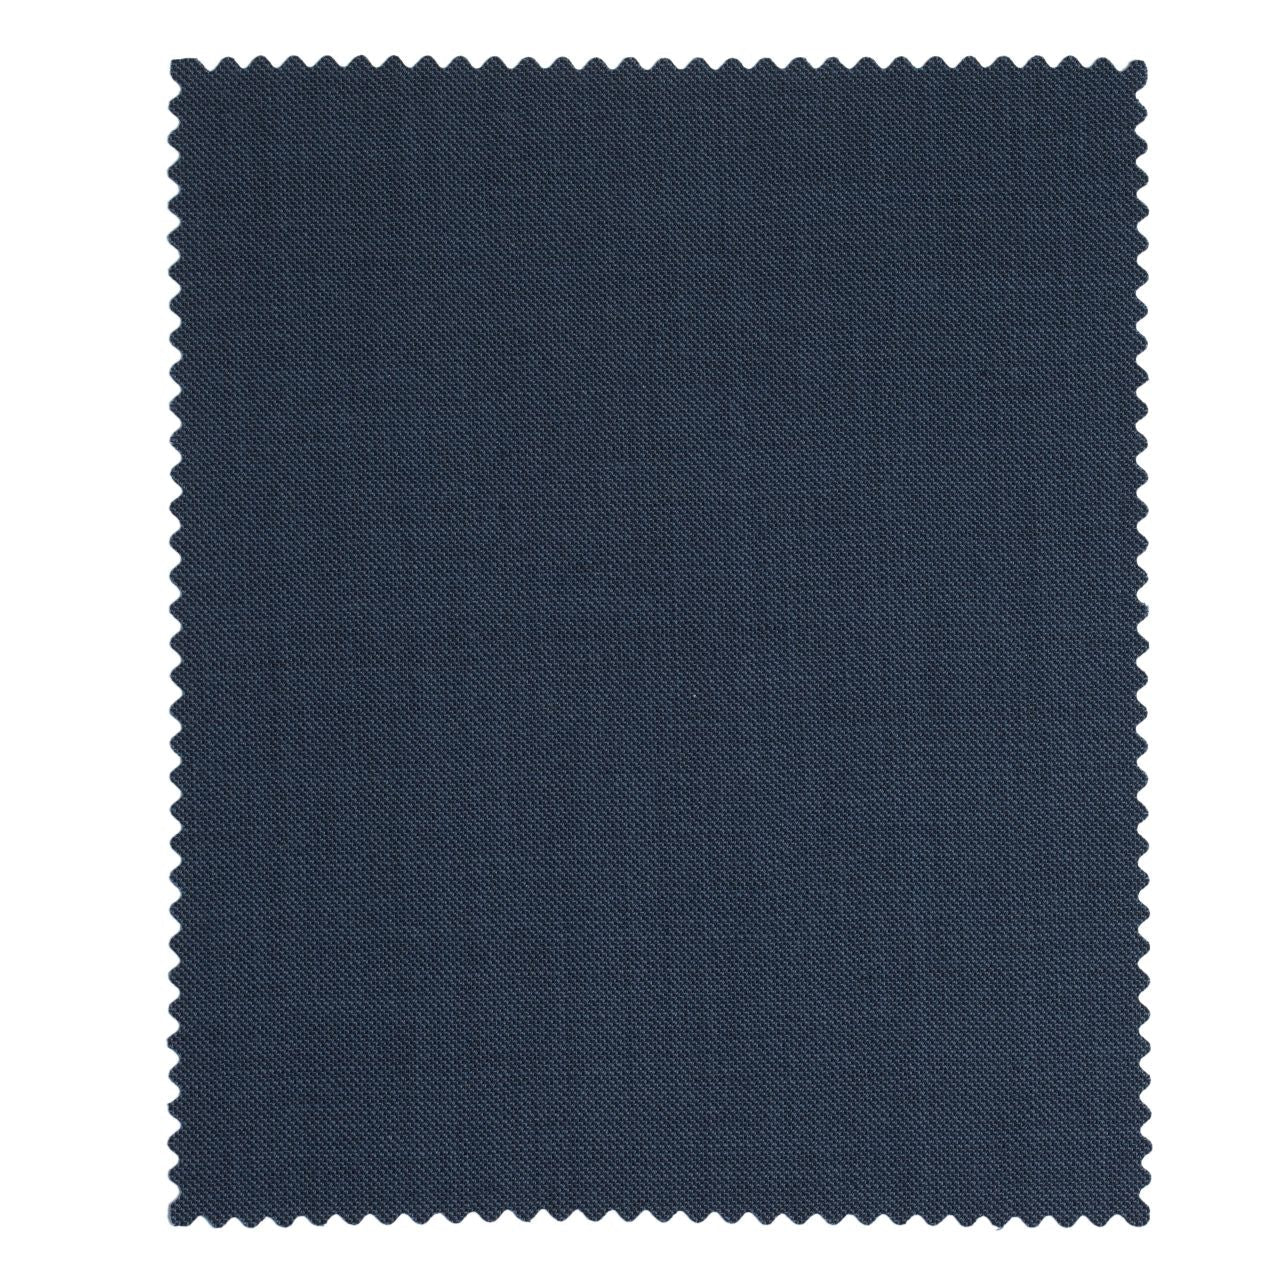 BIG FIT Sharkskin Super 120s Worsted Wool Comfort-EZE Trouser in New Navy (Manchester Pleated Model) by Ballin